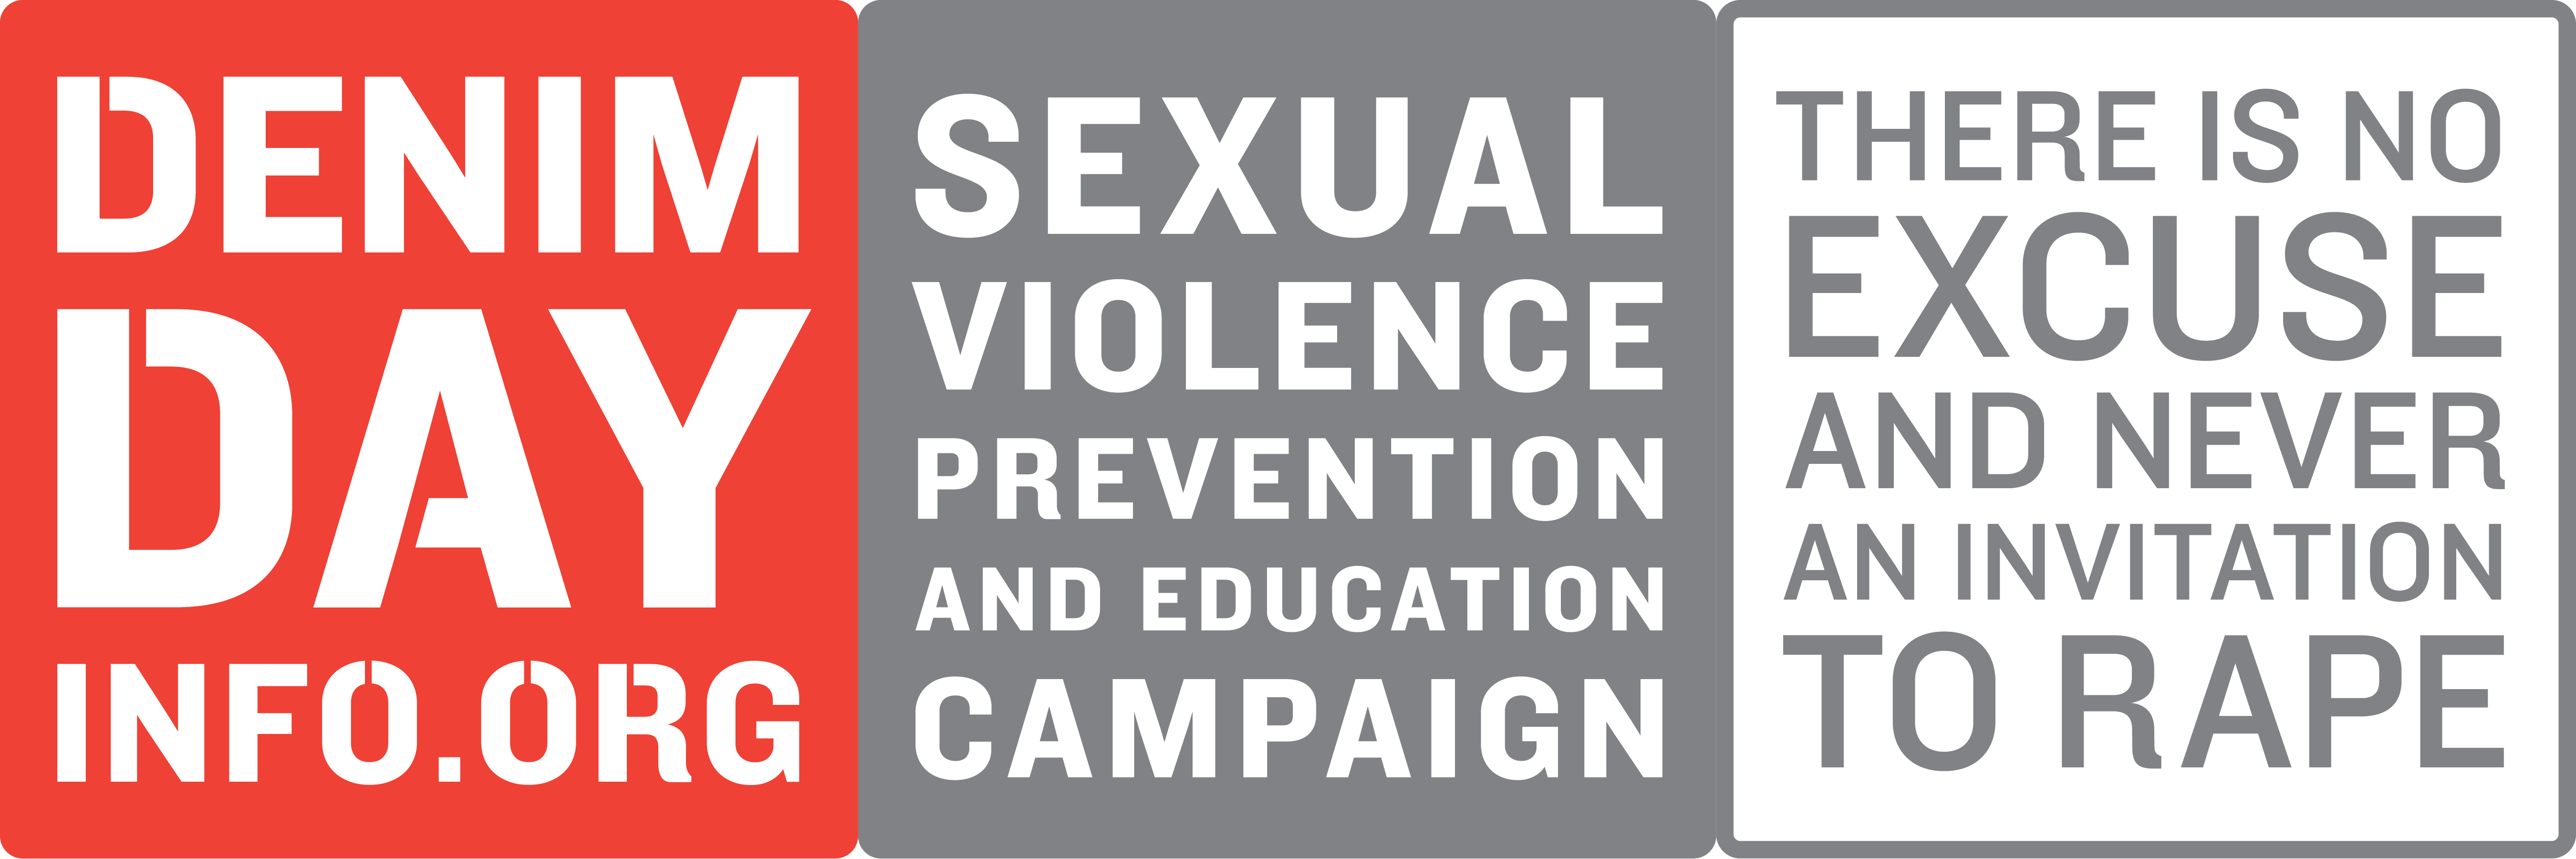 graphic that reads "denim day info.org, sexual violence prevention and education campaign, there is no excuse and never an invitation to rape."